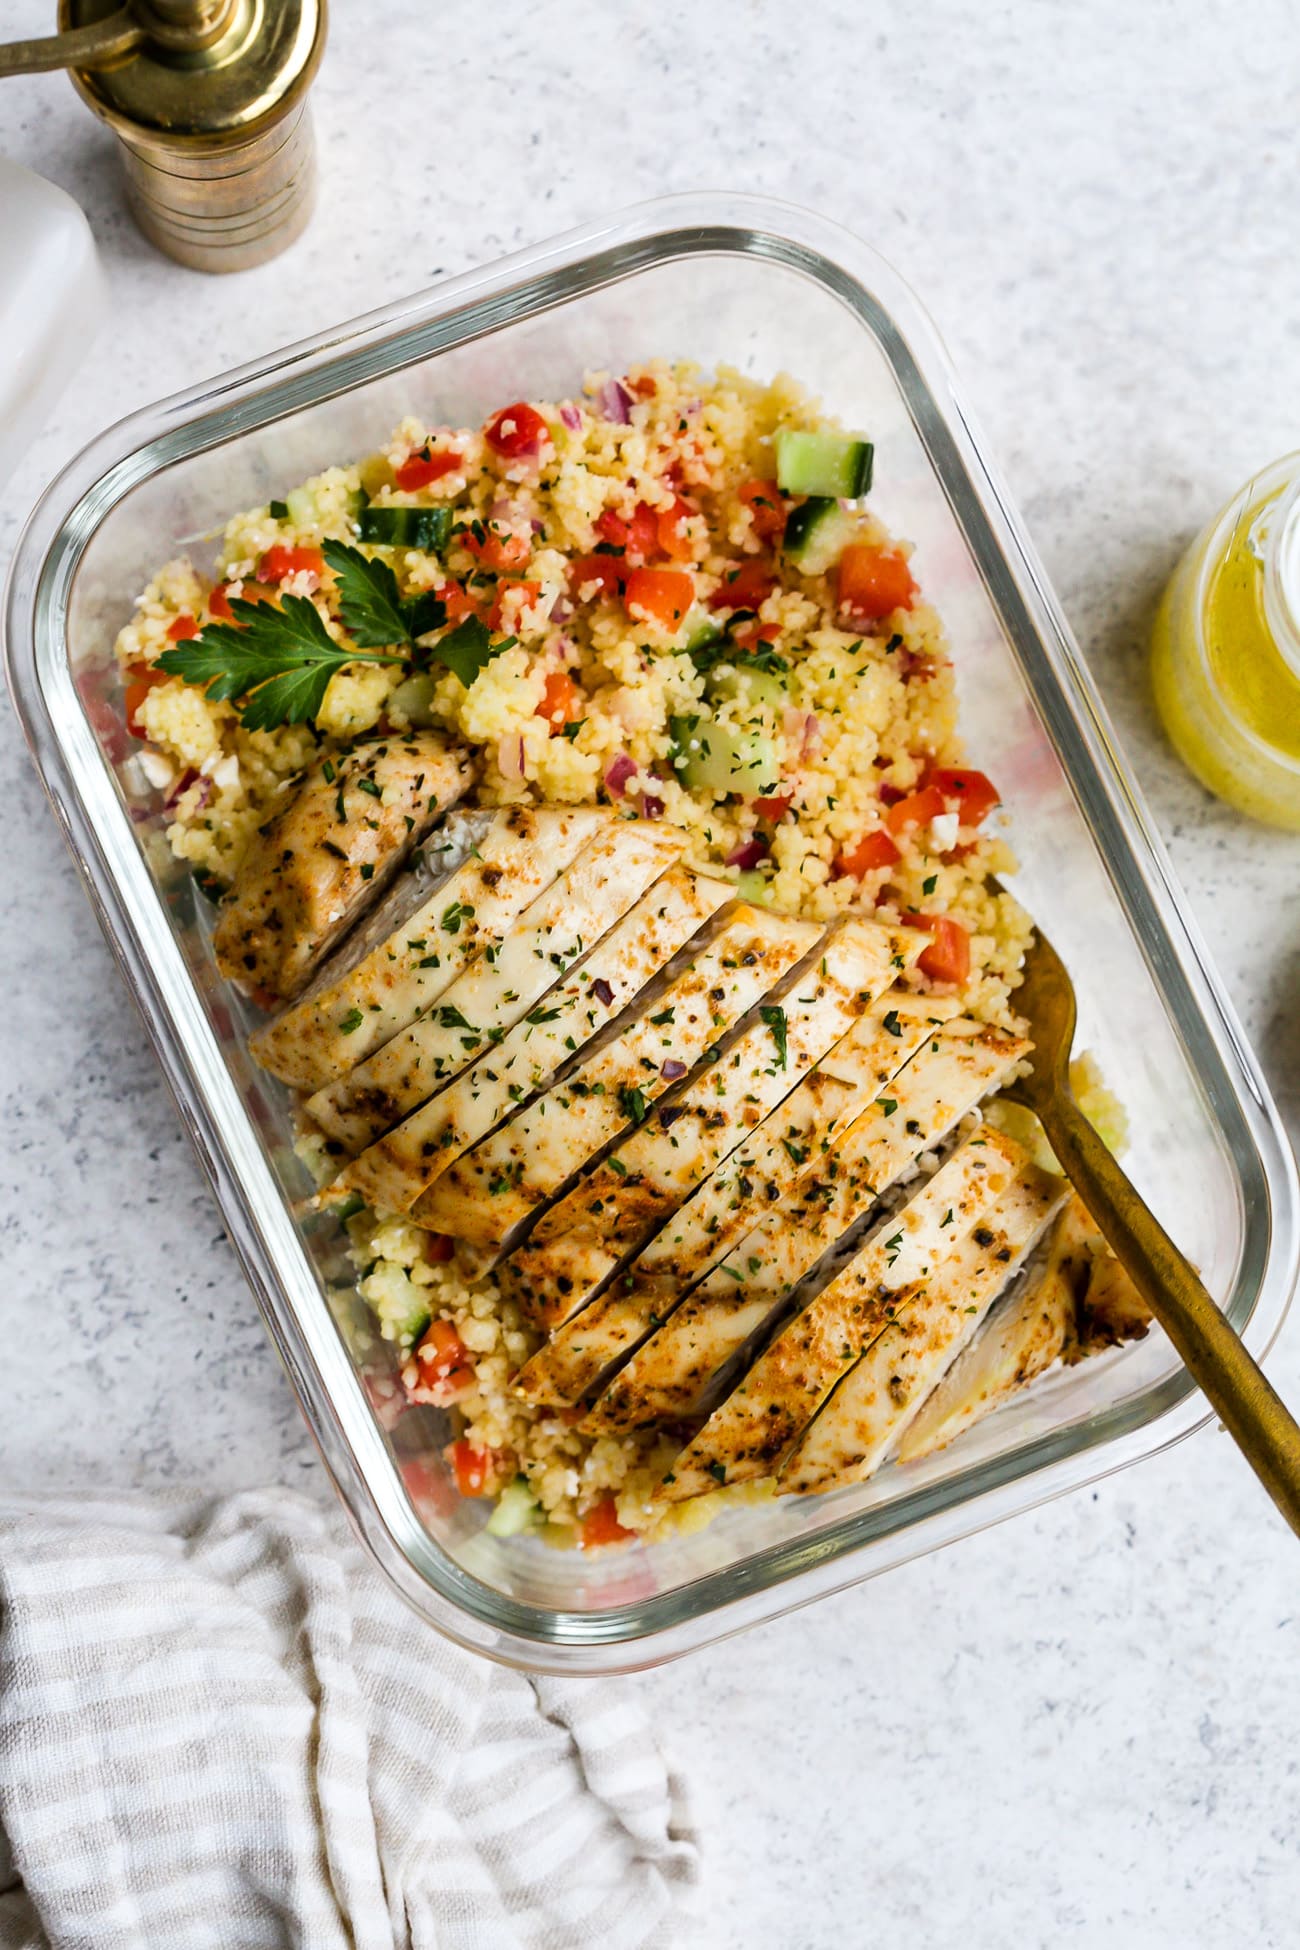 Chicken couscous salad in a small, glass meal-prep container.